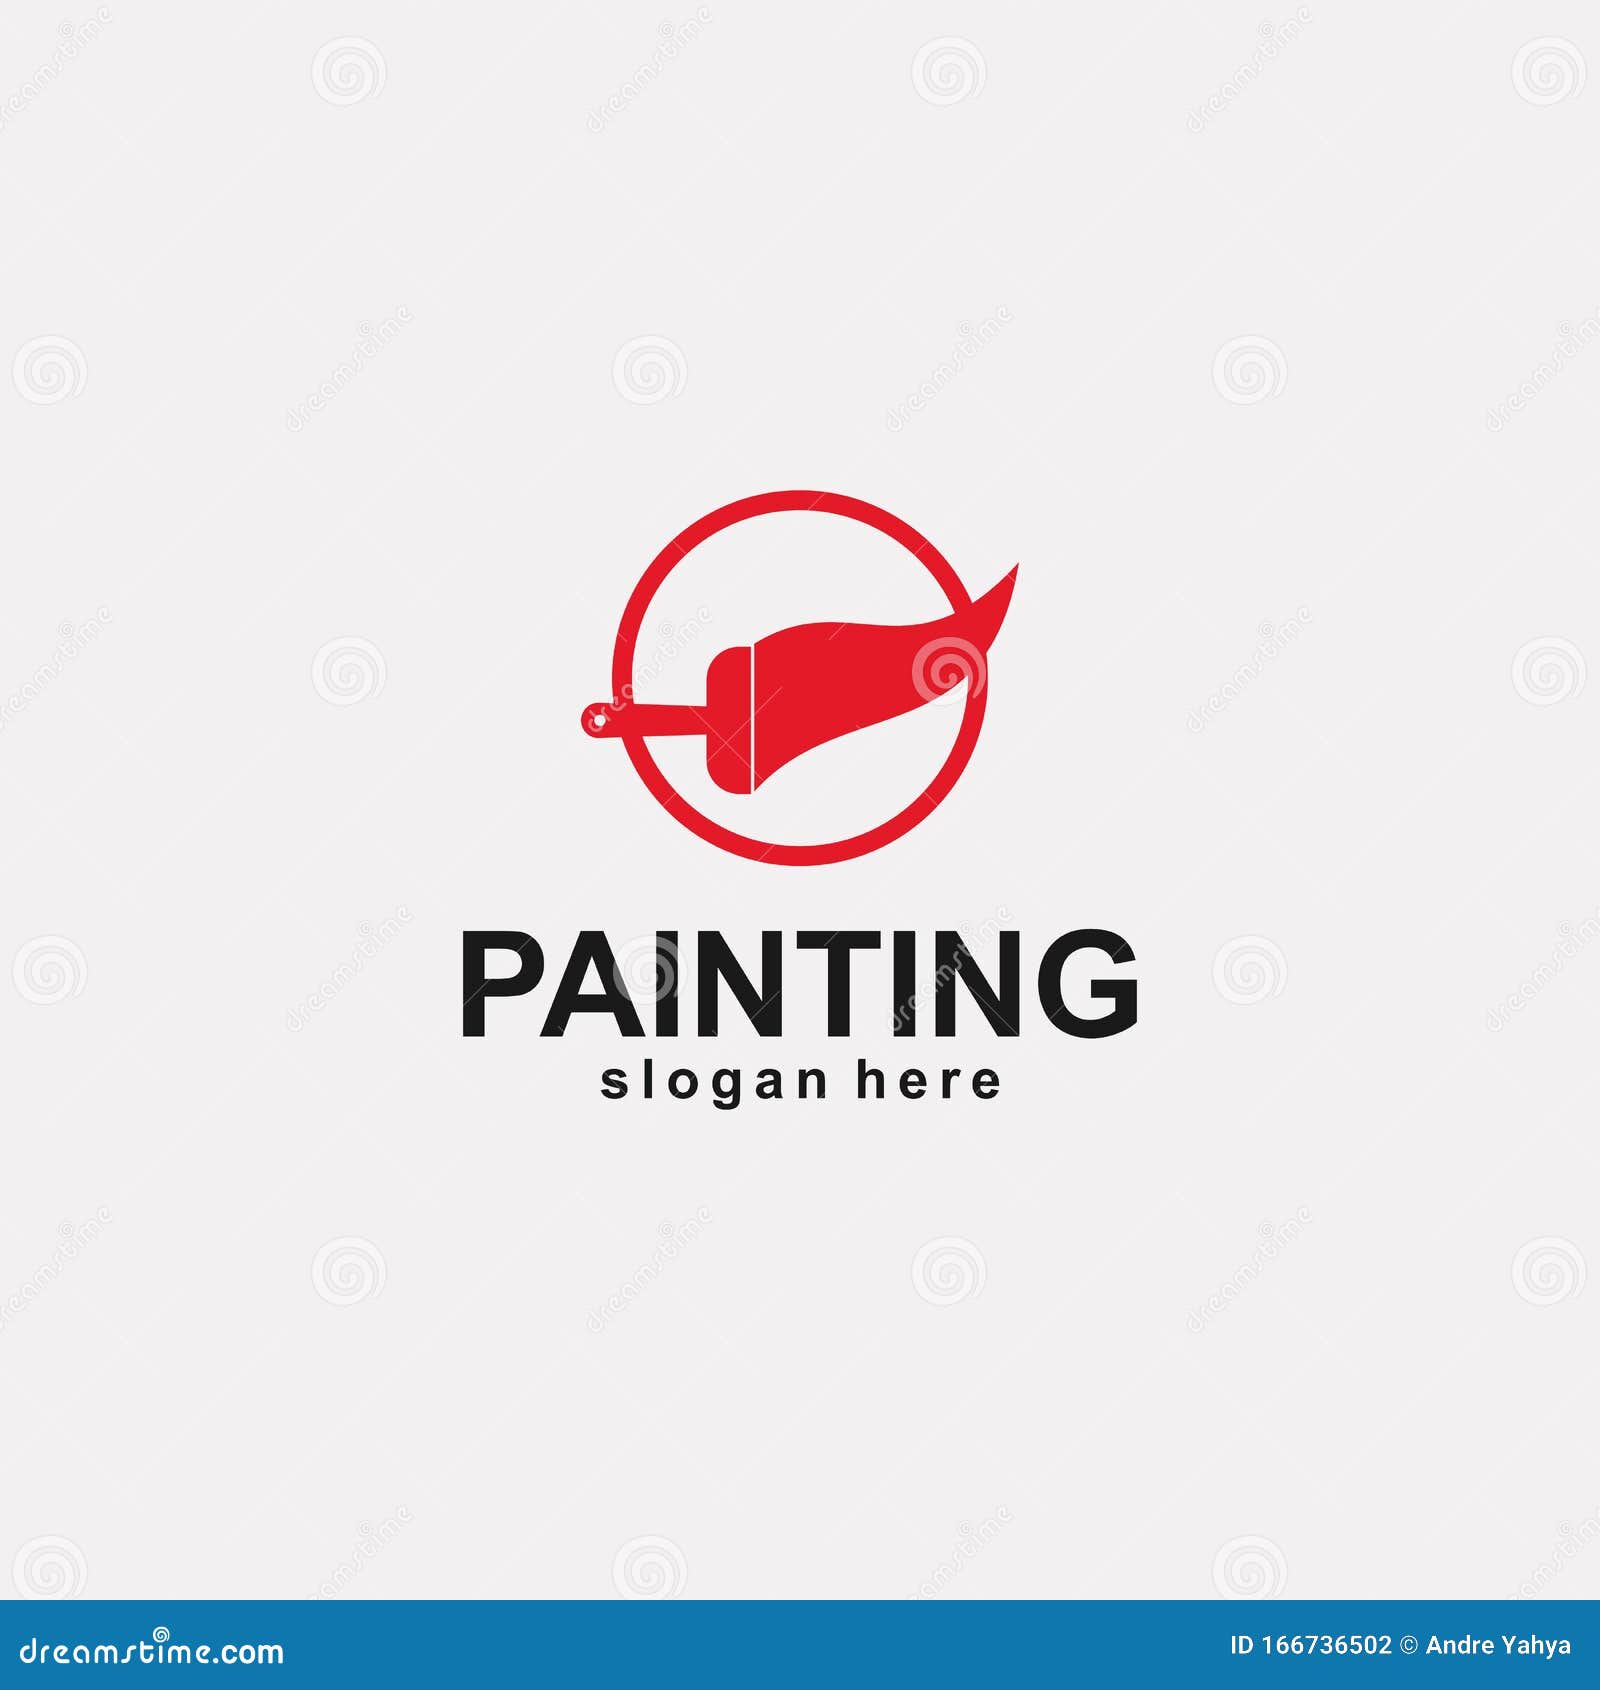 PAINTING LOGO TEMPLATE stock illustration. Illustration of concept